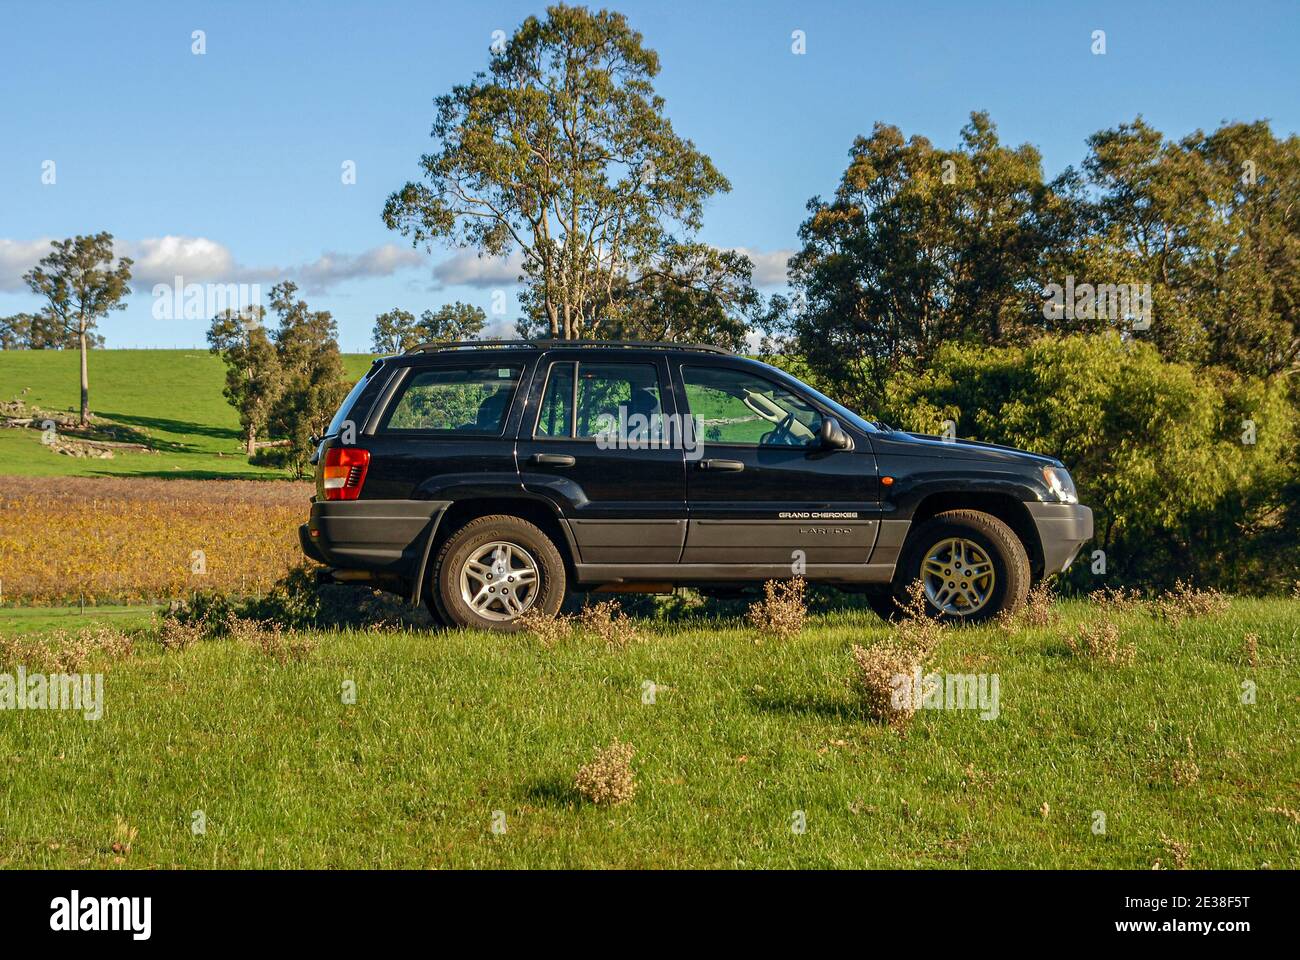 A side on view of a black 2005 Jeep Grand Cherokee Laredo, in a rural setting. Stock Photo